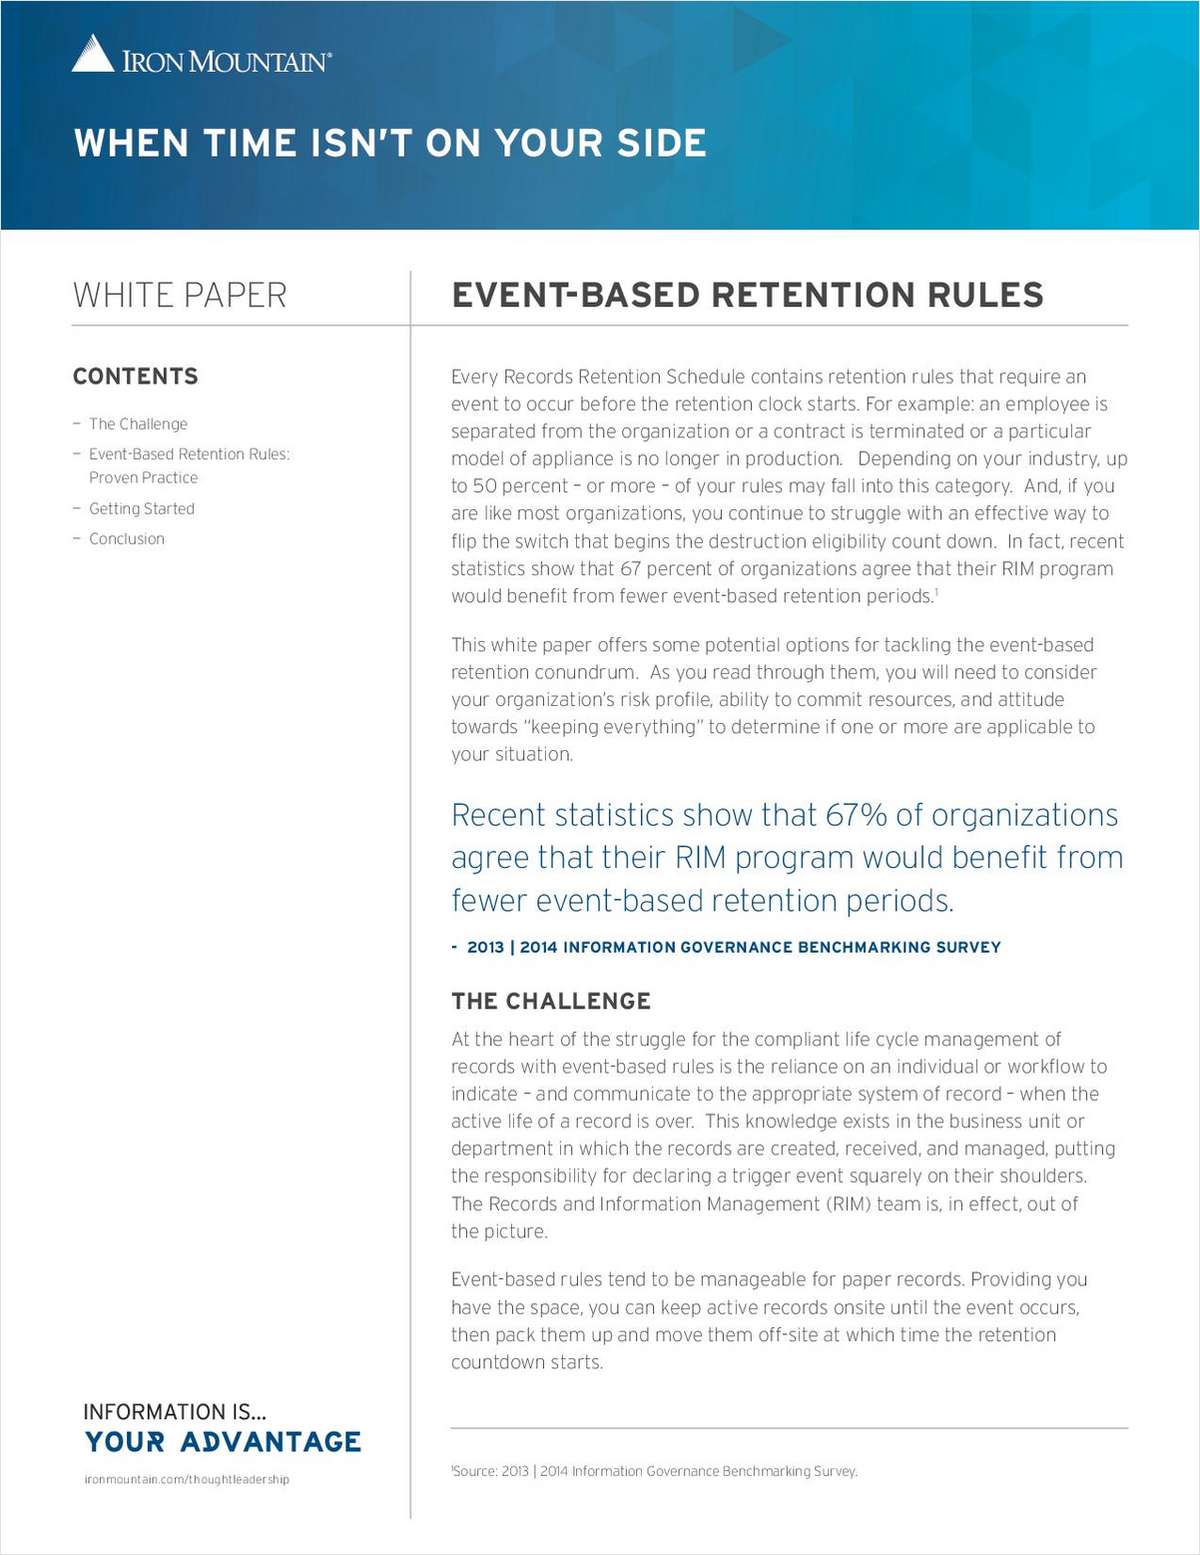 When Time Isn't on Your Side: Options for Tackling Event Based Retention Rules